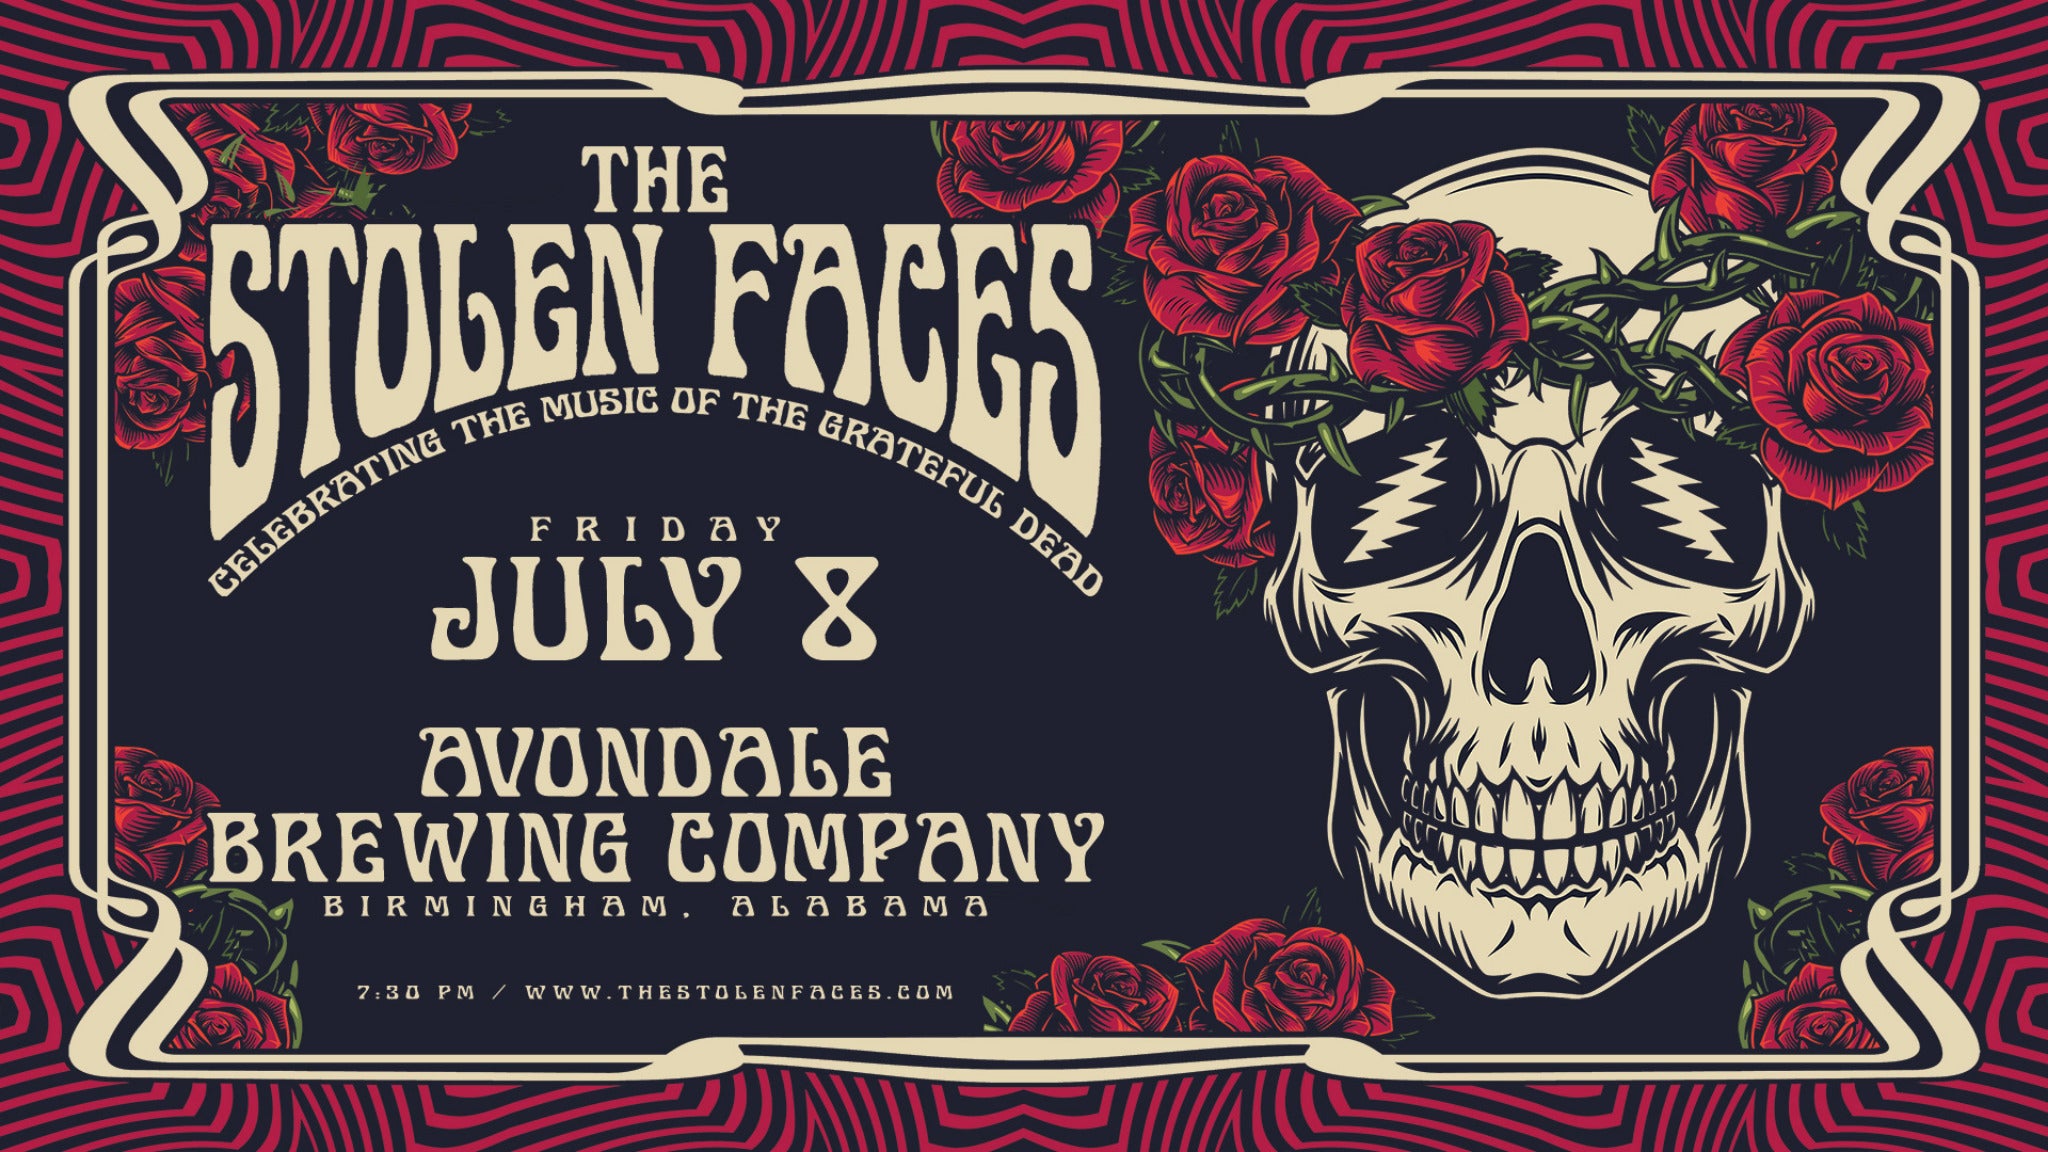 The Stolen Faces at Avondale Brewing Co.